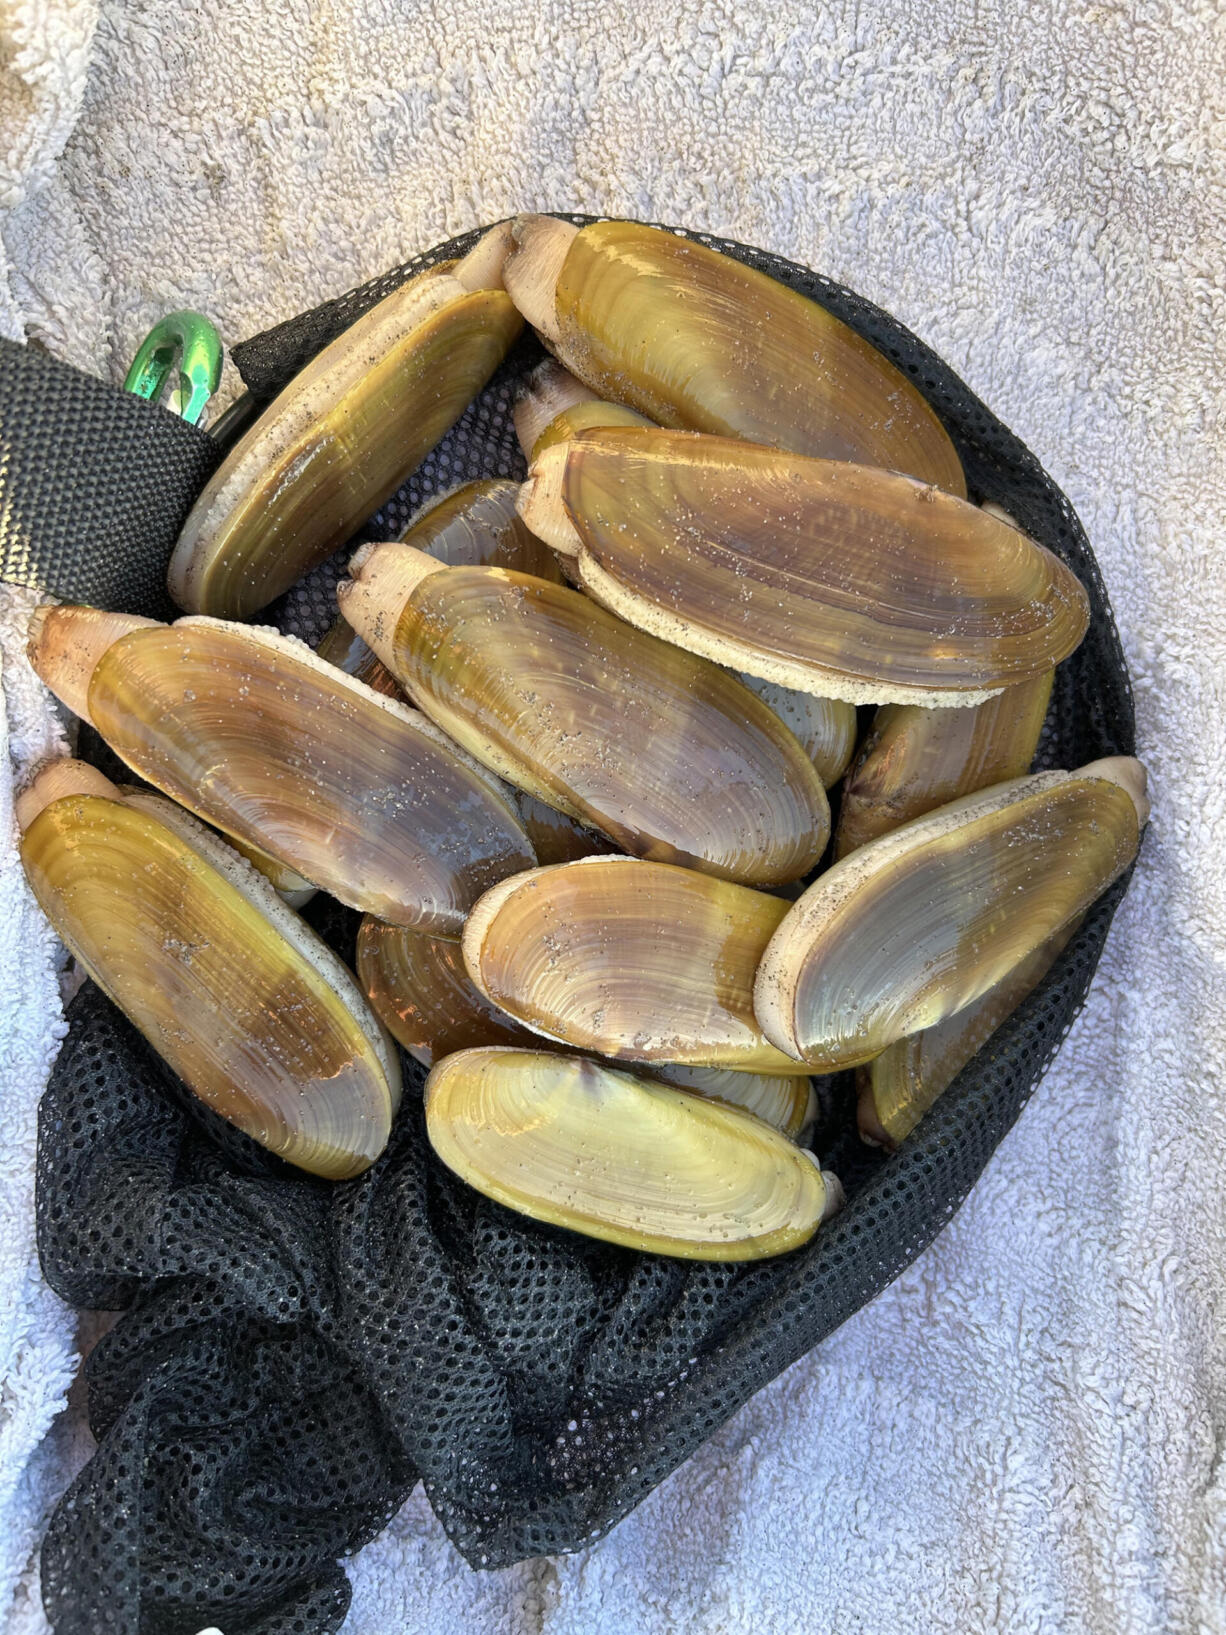 The clams dug in 2023 have been smaller than the past two seasons. This limit of 15 was taken south of the Oysterville Approach at the north end of Long Beach Peninsula.